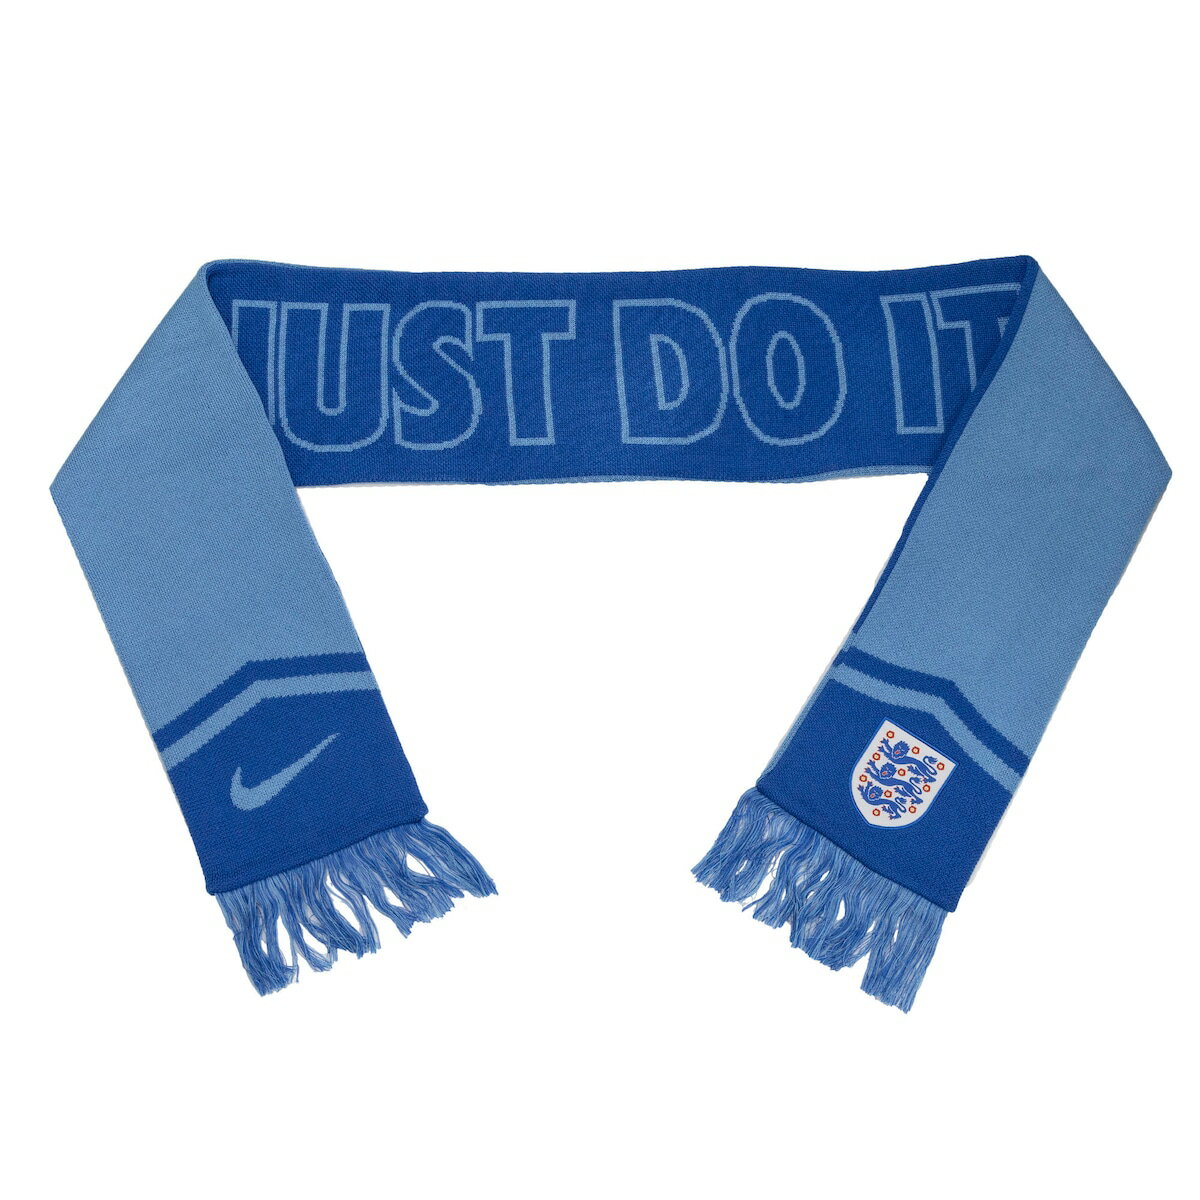 Show your devotion to the England National Team with this fashionable Local Verbiage scarf from Nike. It features double-sided graphics and fringe on both ends for added England National Team flair. This scarf makes the perfect accent for any game day outfit thanks to its soft fabric and fun design.ImportedOfficially licensedEmbroidered fabric appliqueFringe endsHand wash, line dryMeasures approx. 66'' including fringe x 6.5''Woven graphicsMaterial: 100% AcrylicBrand: NikeDouble-sided design differs per side